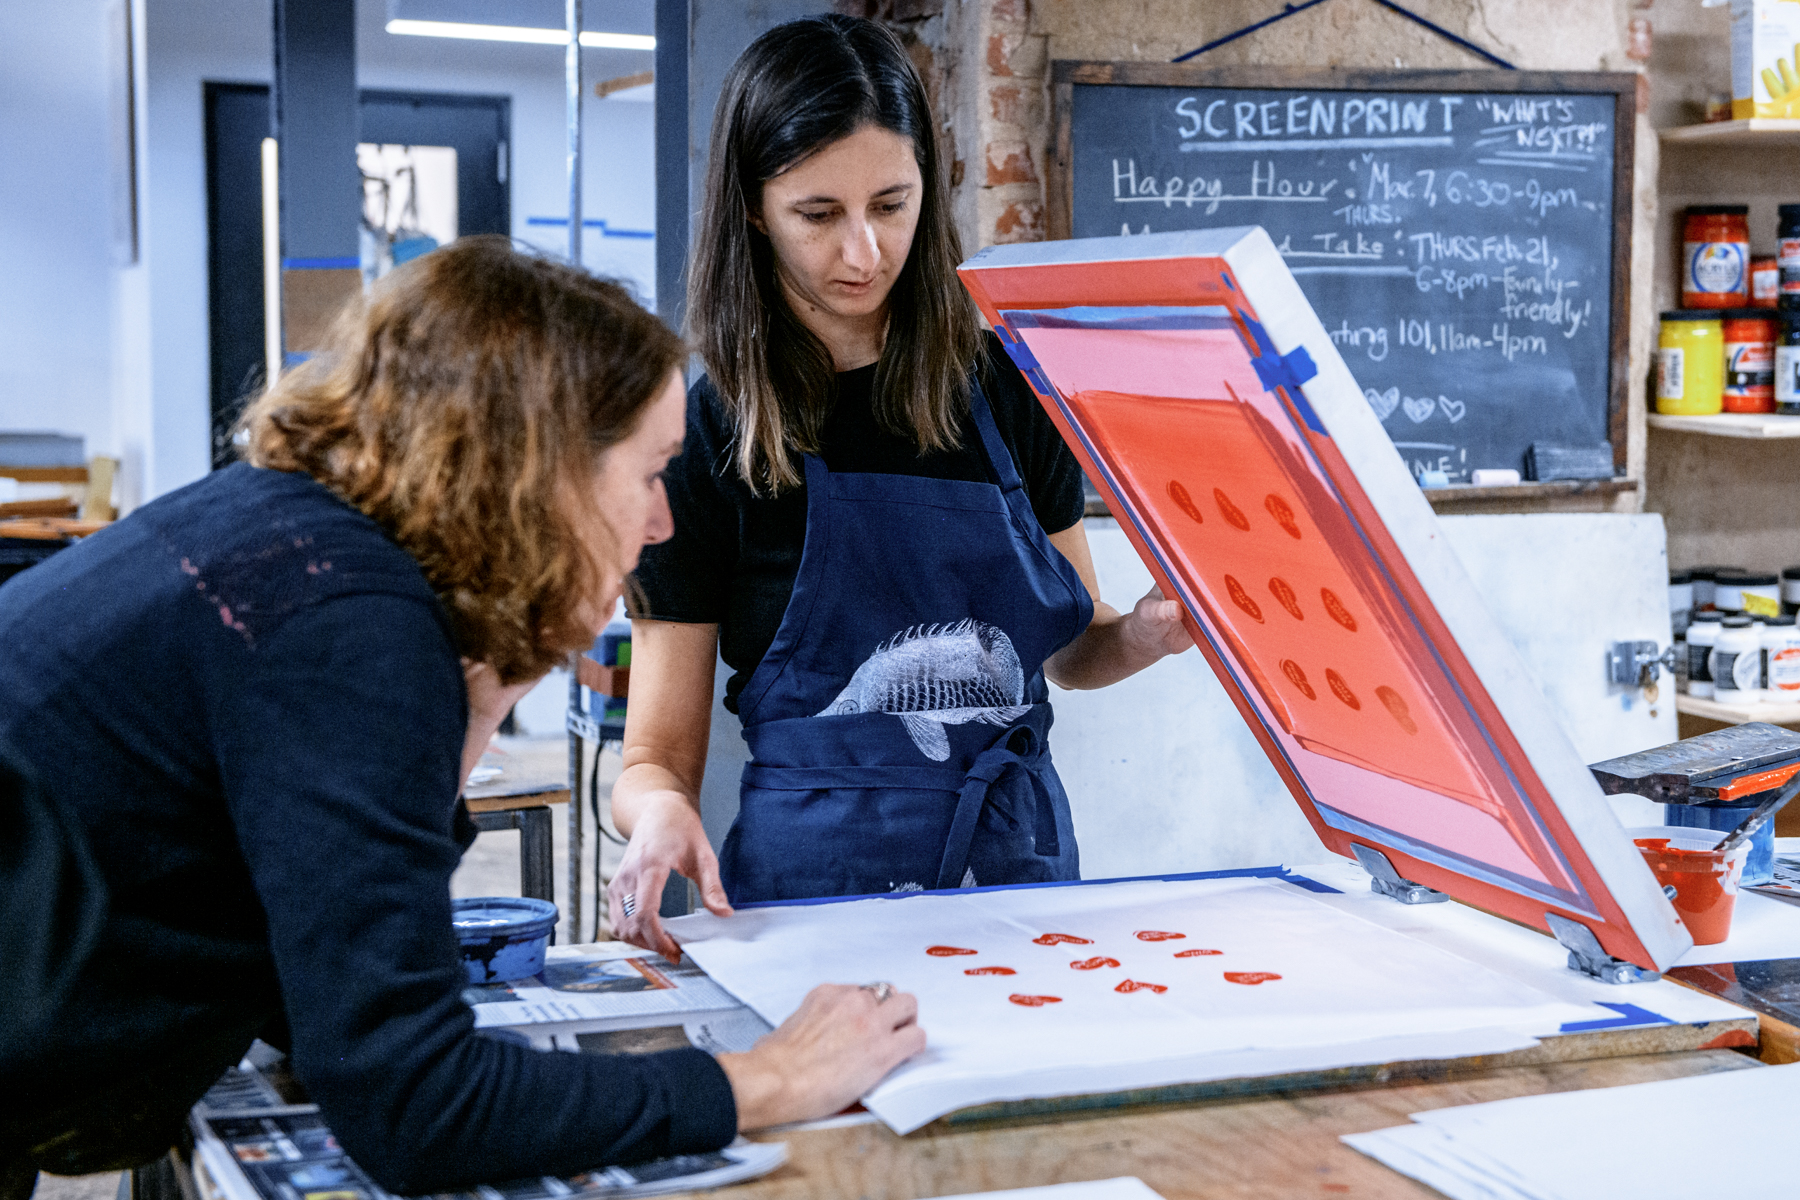 March Screenprinting Happy Hour